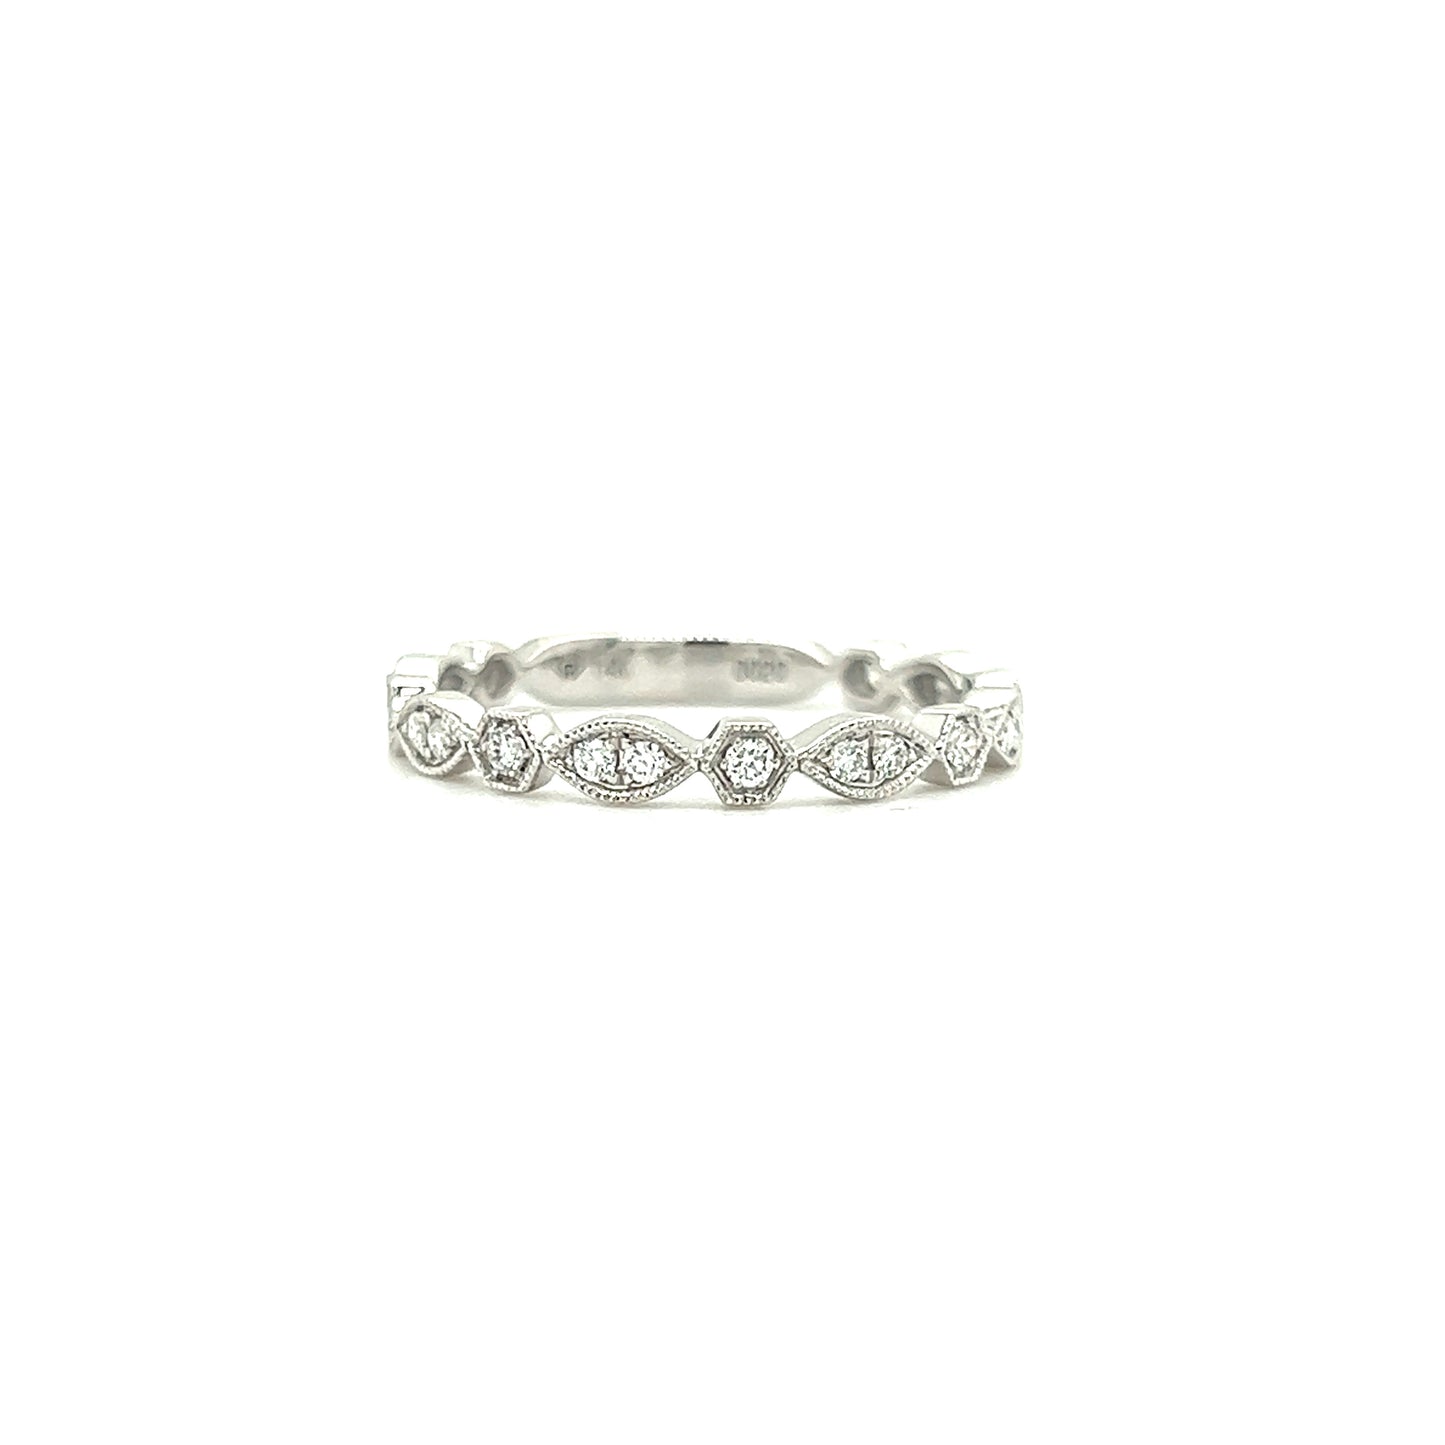 Hexagonal Diamond Ring with 0.20ctw of Diamonds in 14K White Gold Front View